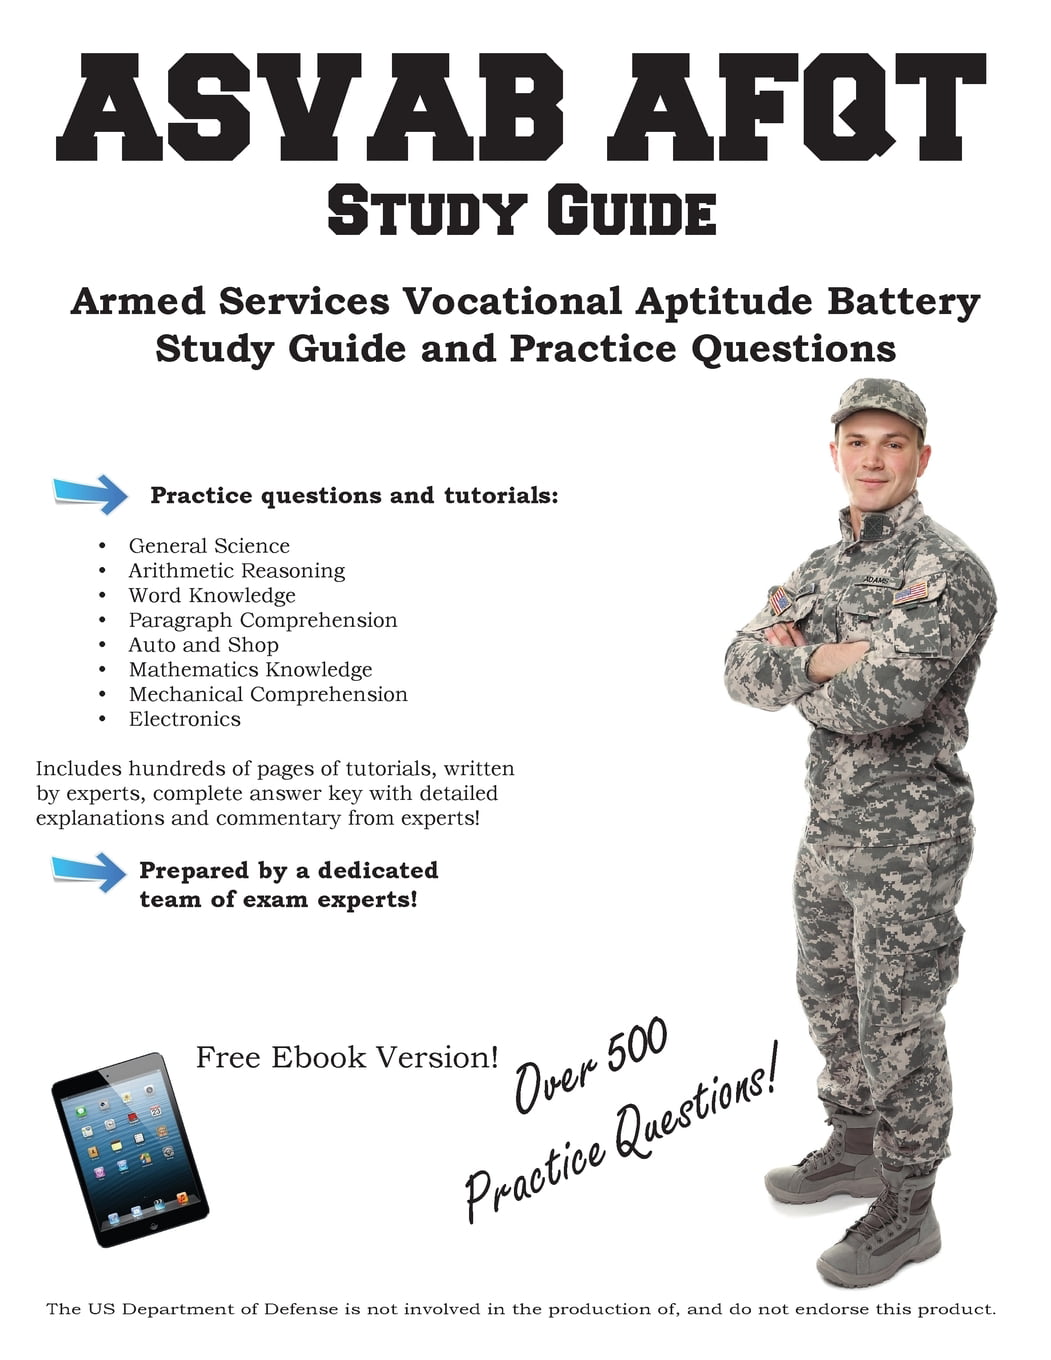 pass-the-asvab-complete-armed-services-vocational-aptitude-battery-study-guide-and-practice